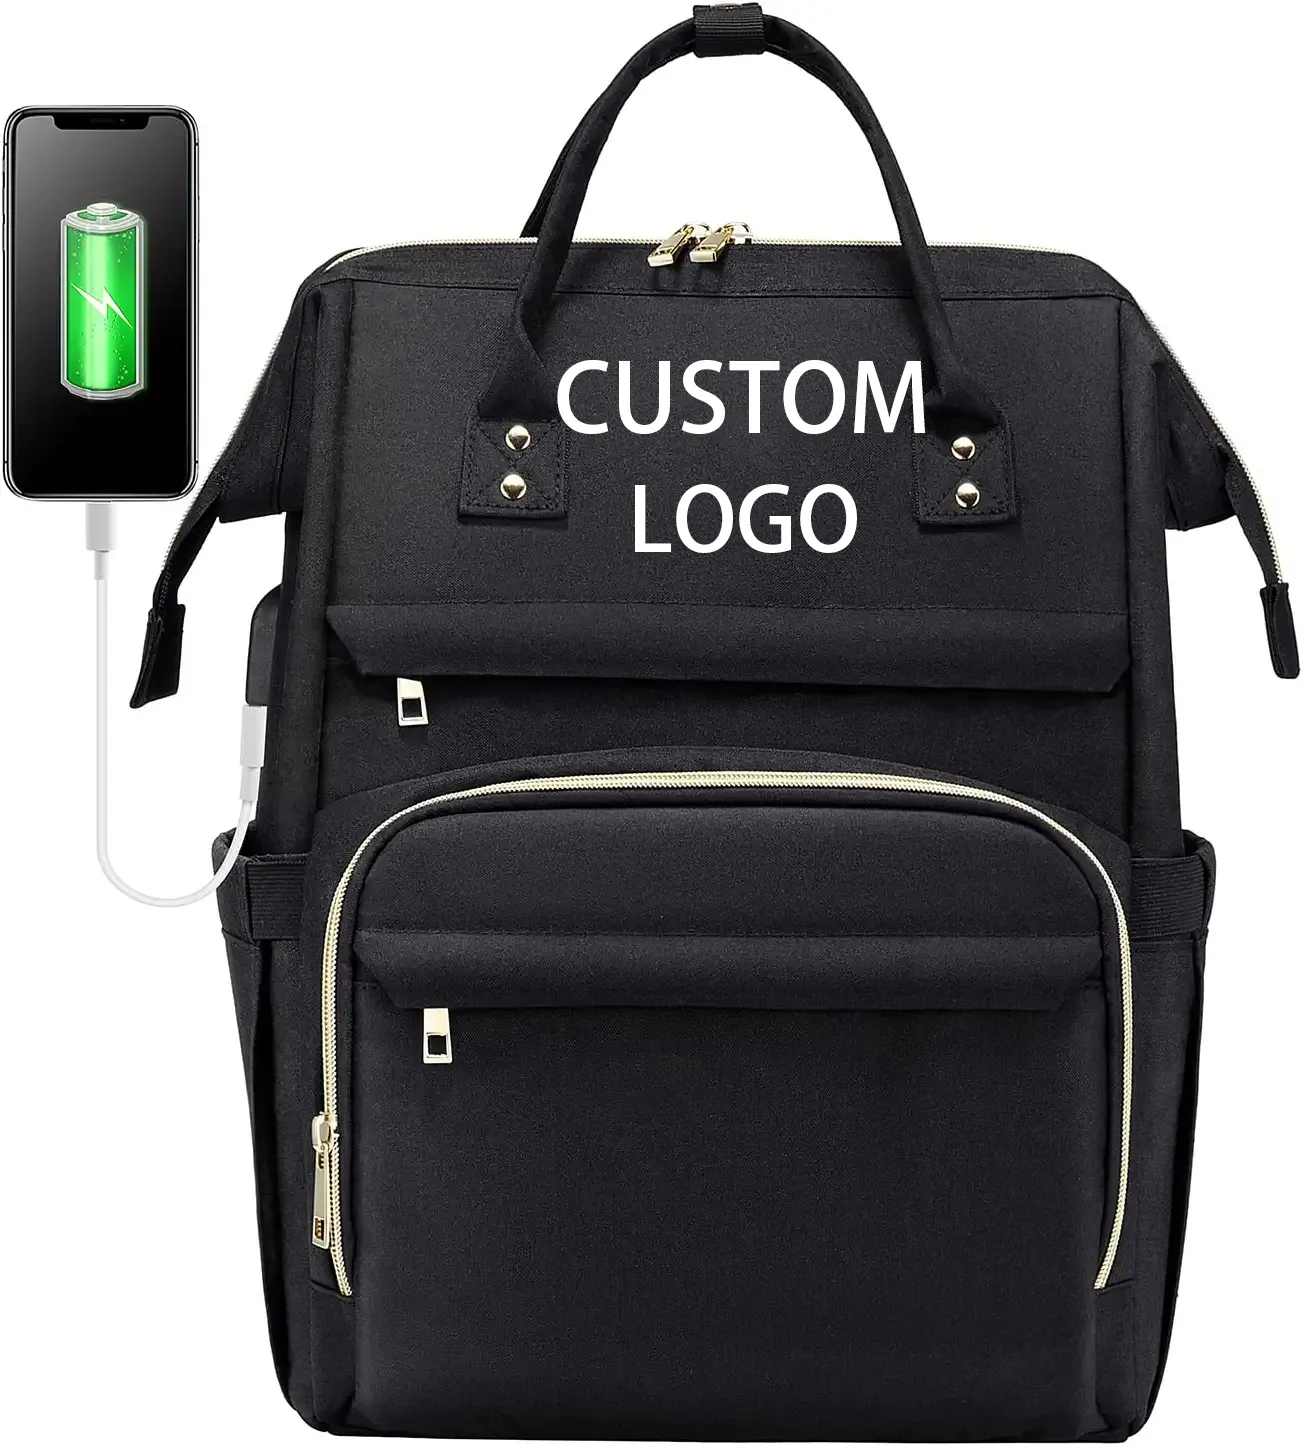 Latest Style Women's 15.6 Inch Fashion Travel Bags Usb Port Clear Handbags Laptop Backpacks Large Capacity Women's Backpacks